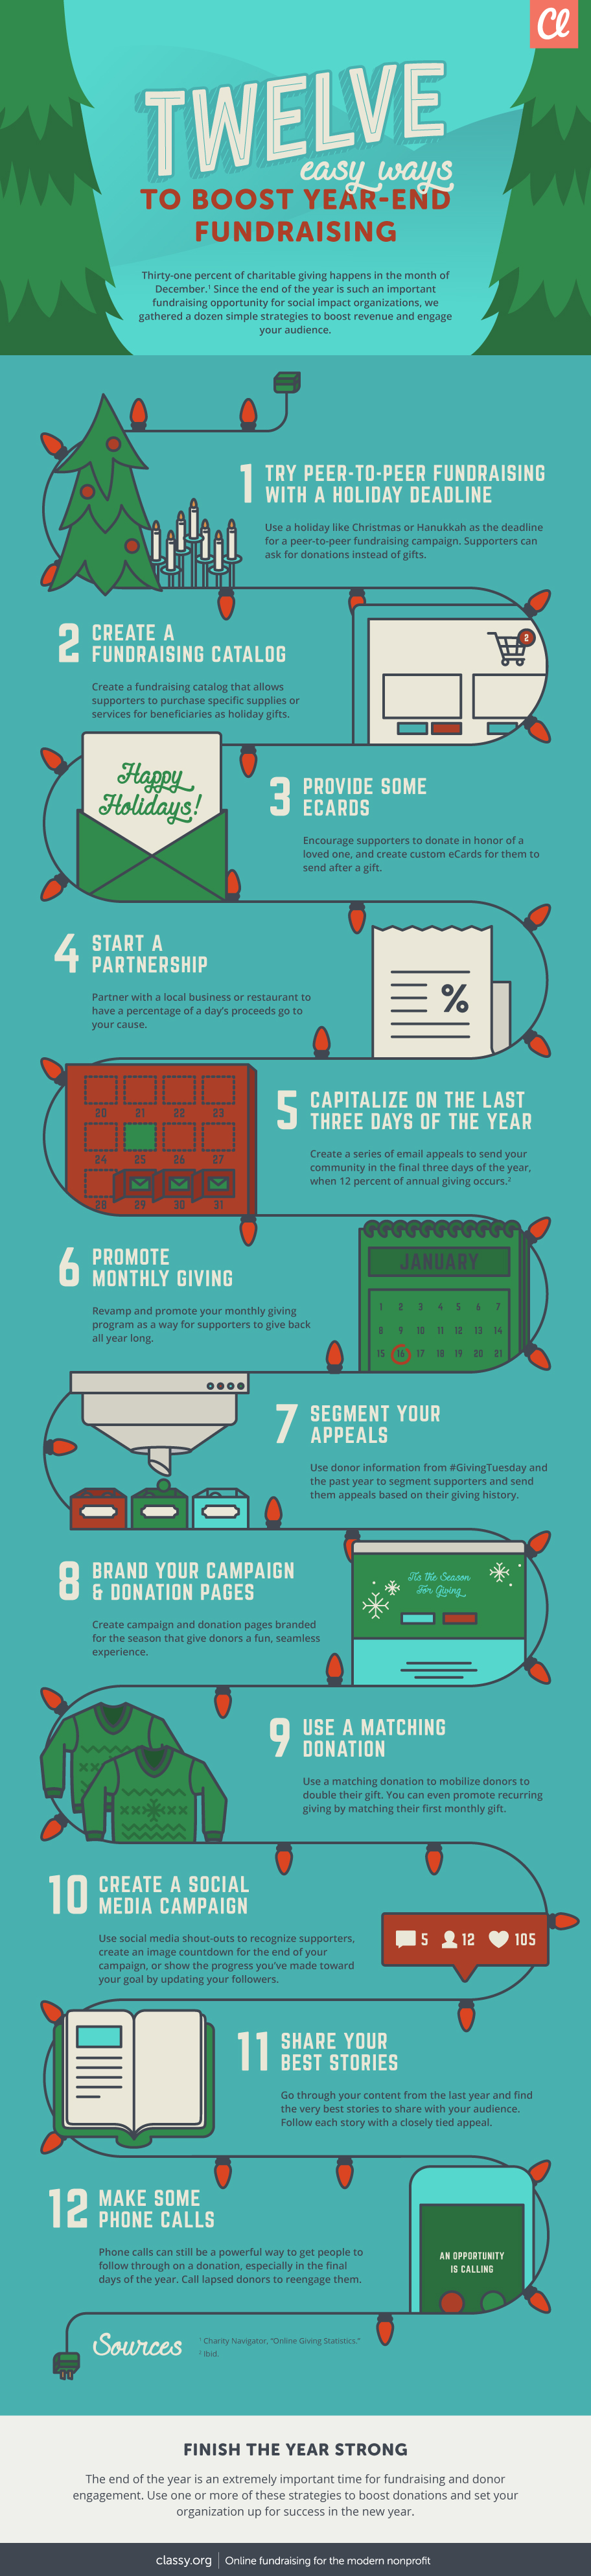 boost year-end fundraising infographic